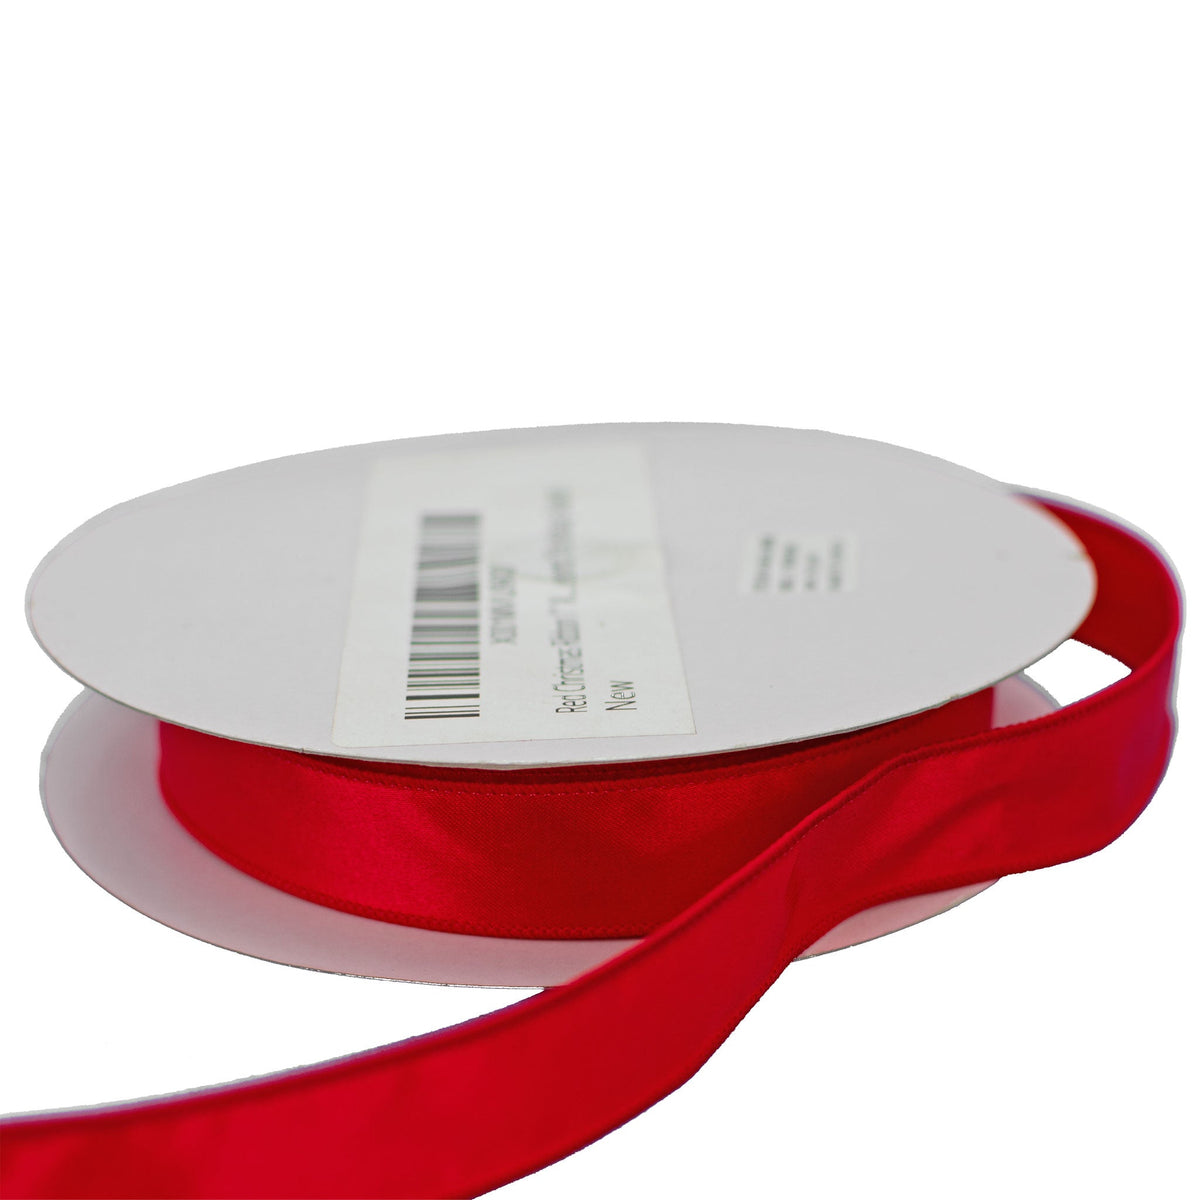 This elegant ribbon combines the rich, lustrous finish of red satin with the practicality of a wired-edge design. The result is a ribbon that not only adds a touch of sophistication to your gifts and decorations but also allows for easy shaping and styling.